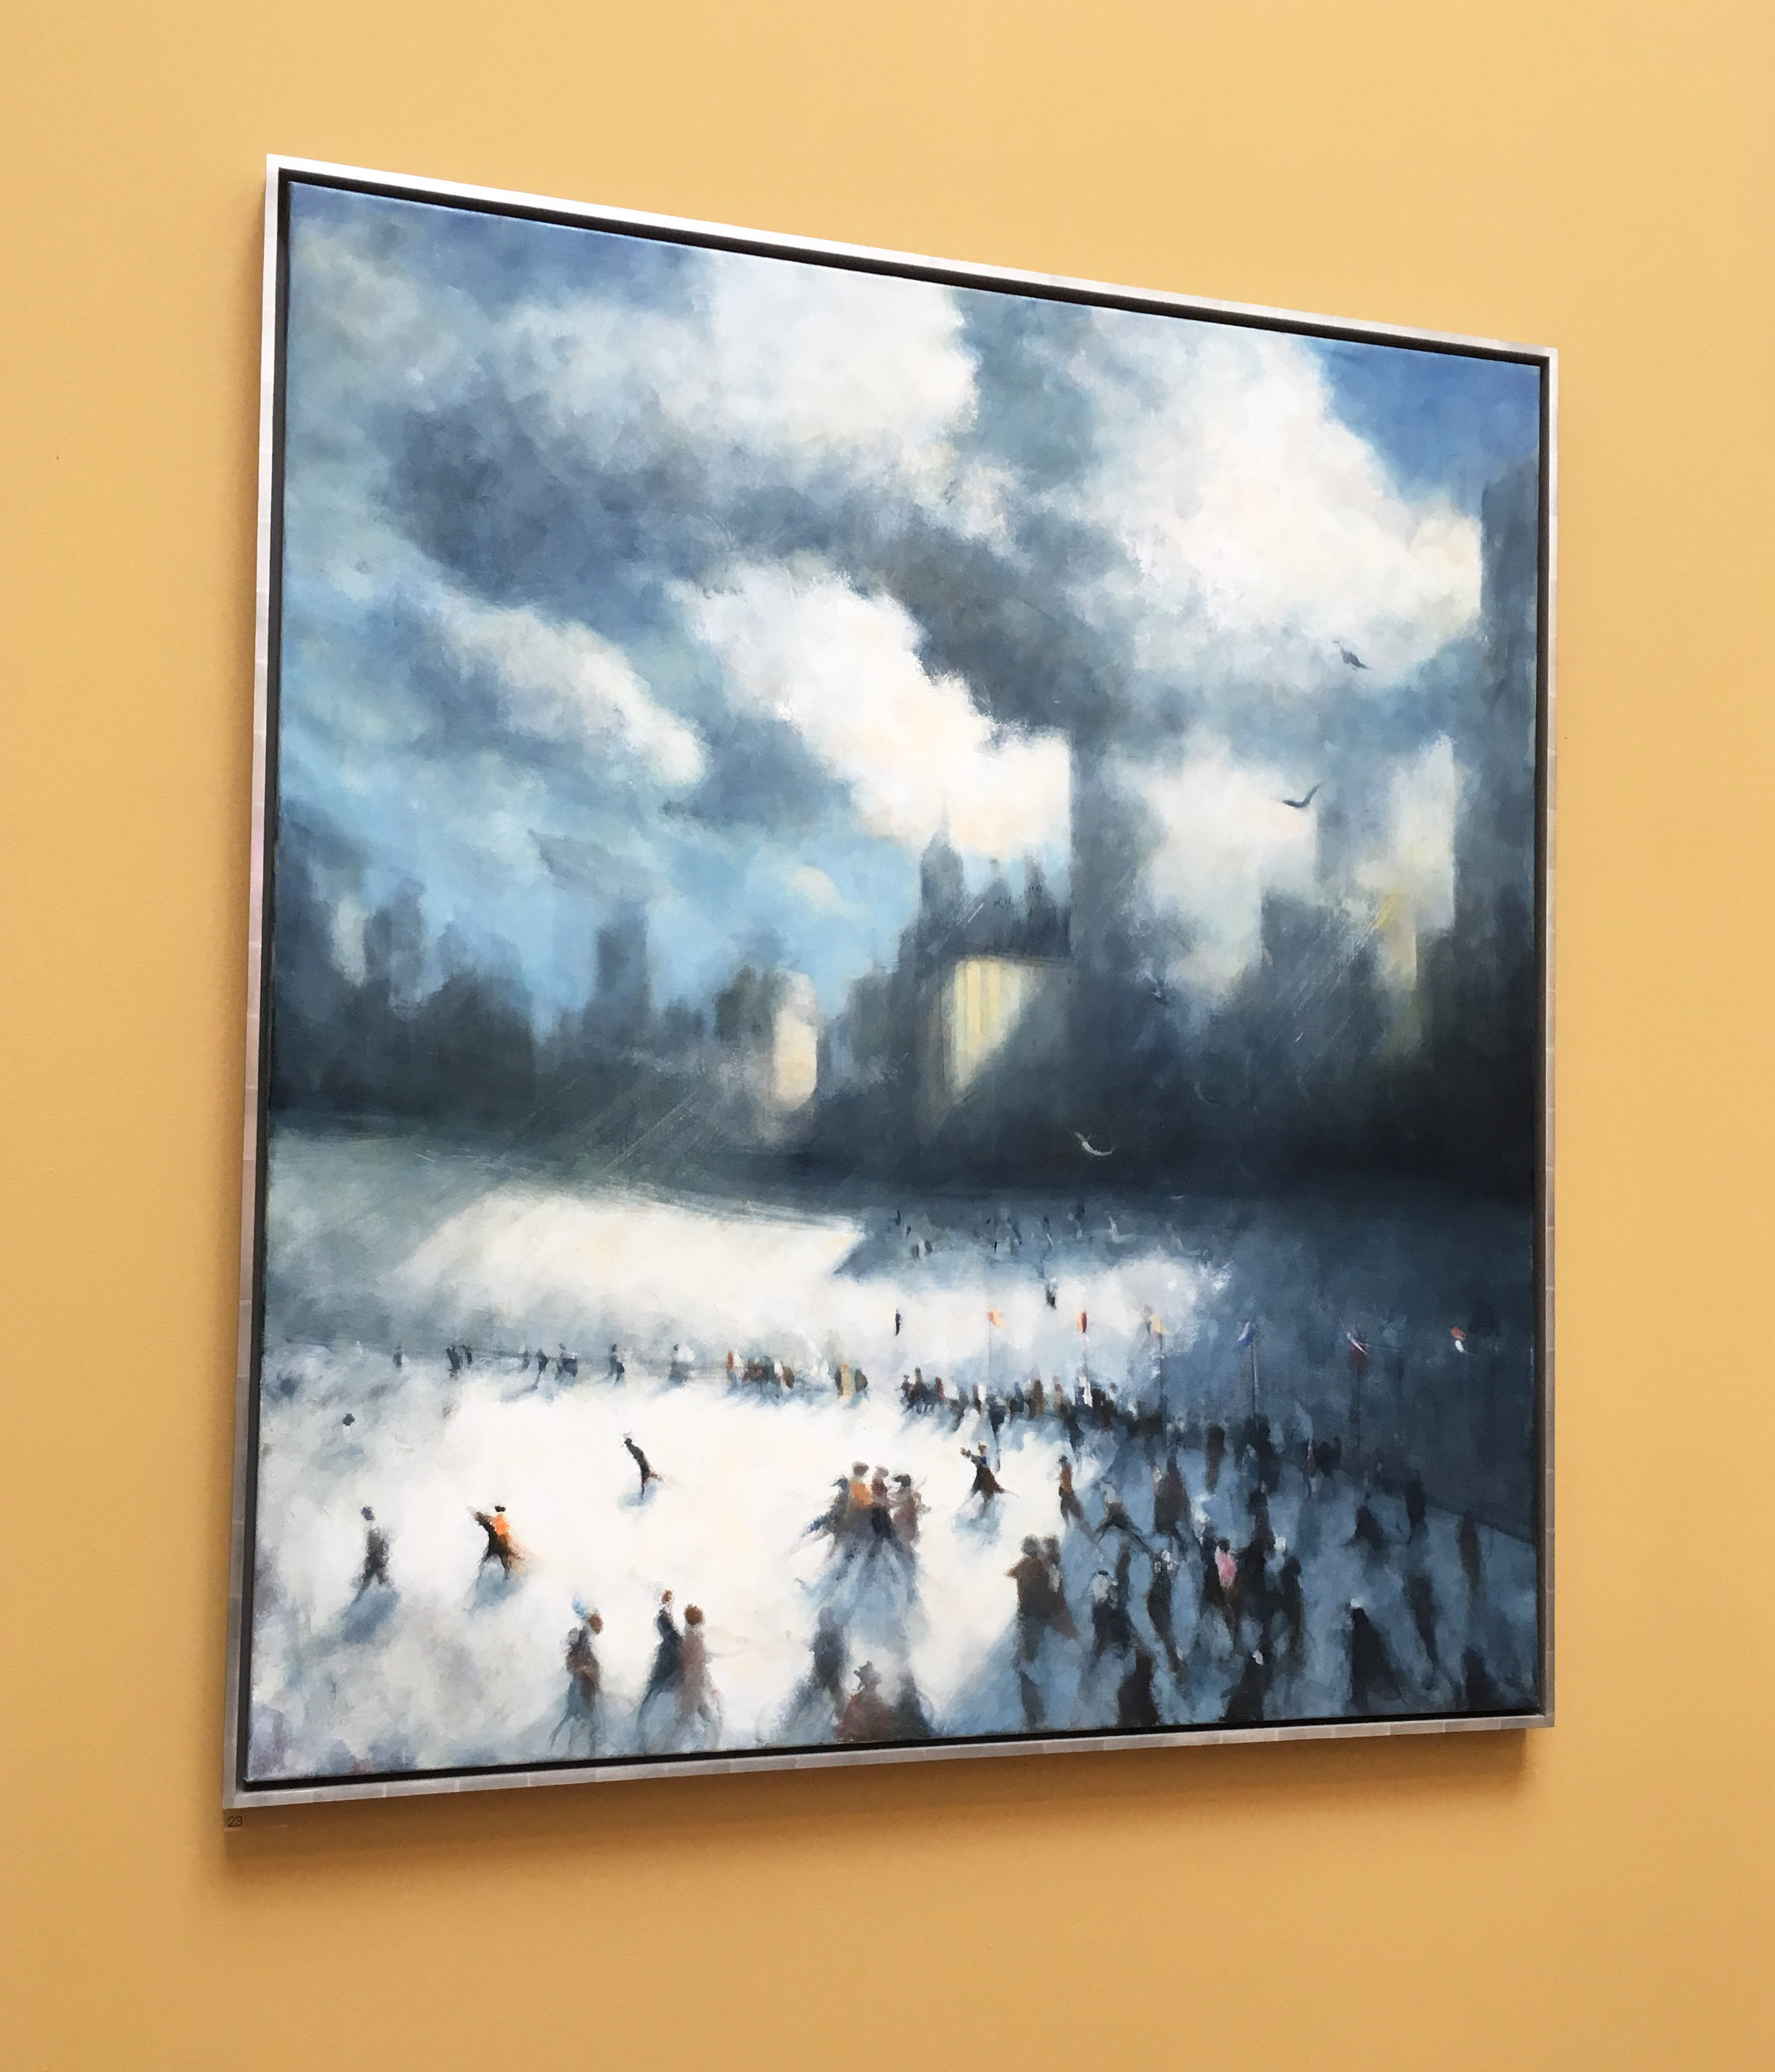 Royal academy 2017 show ice skating painting clouds